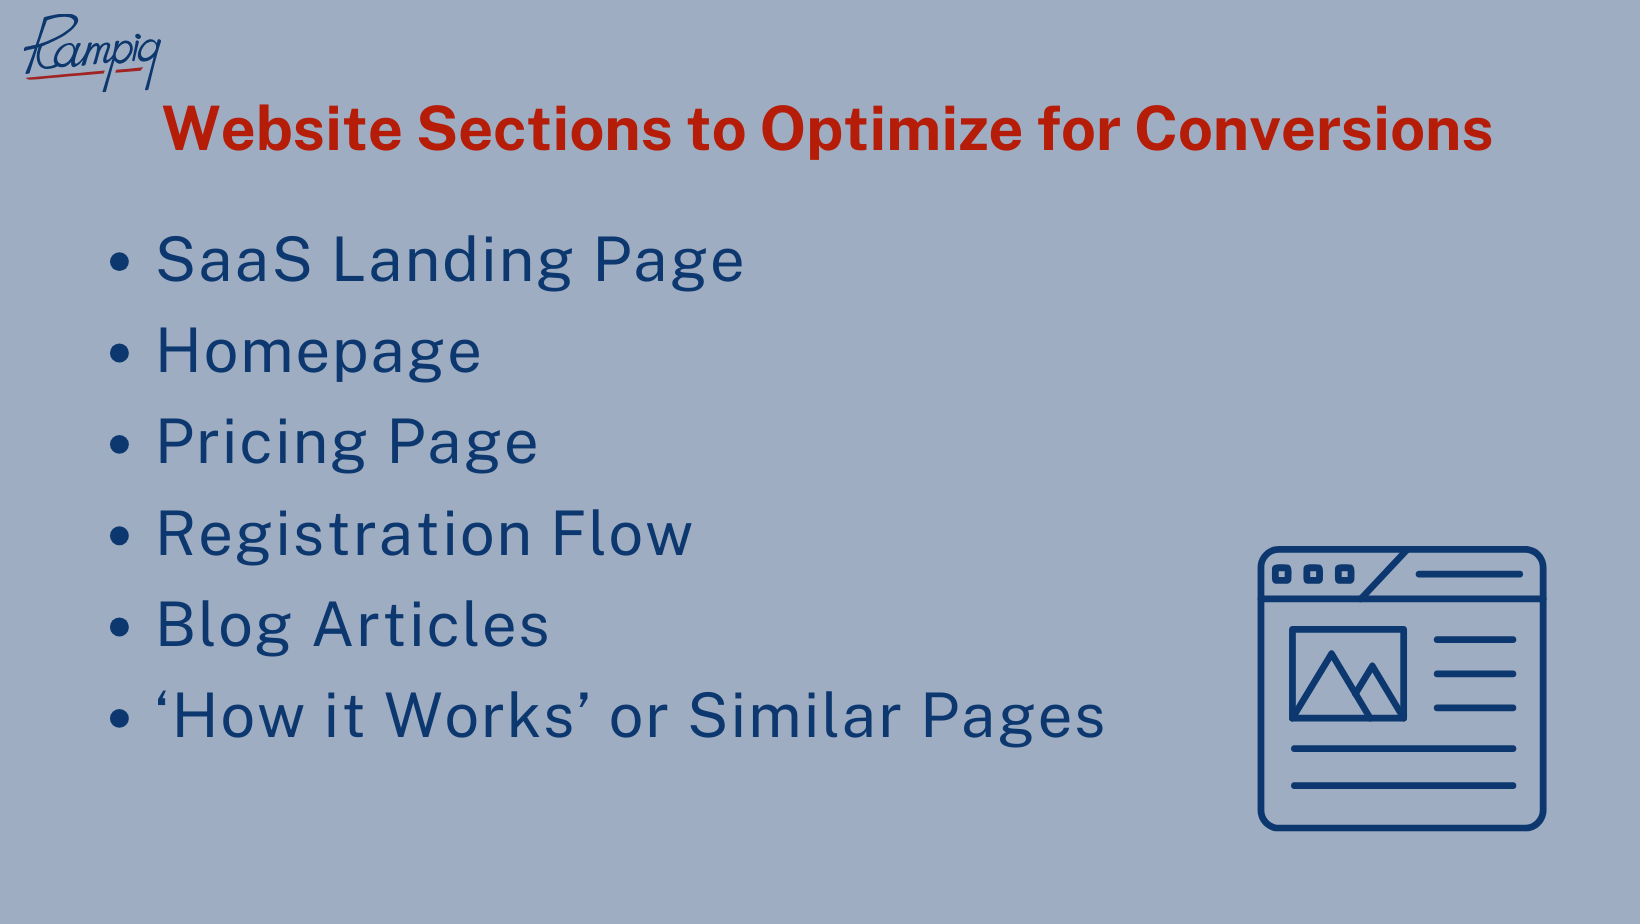 Website Sections to Optimize for Conversions